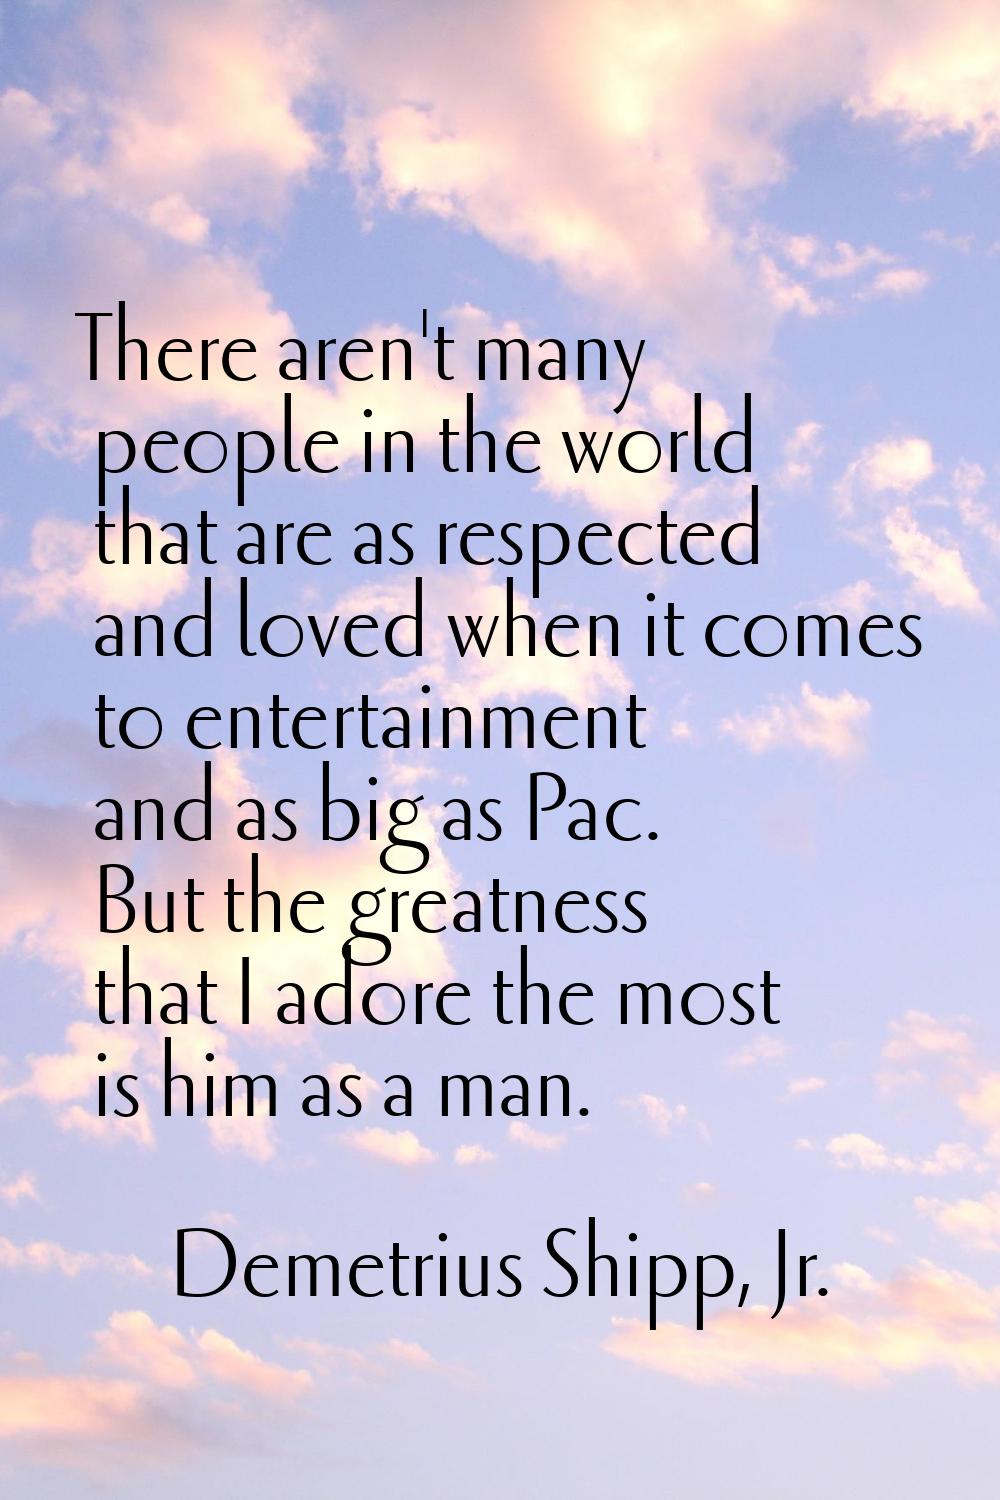 There aren't many people in the world that are as respected and loved when it comes to entertainmen